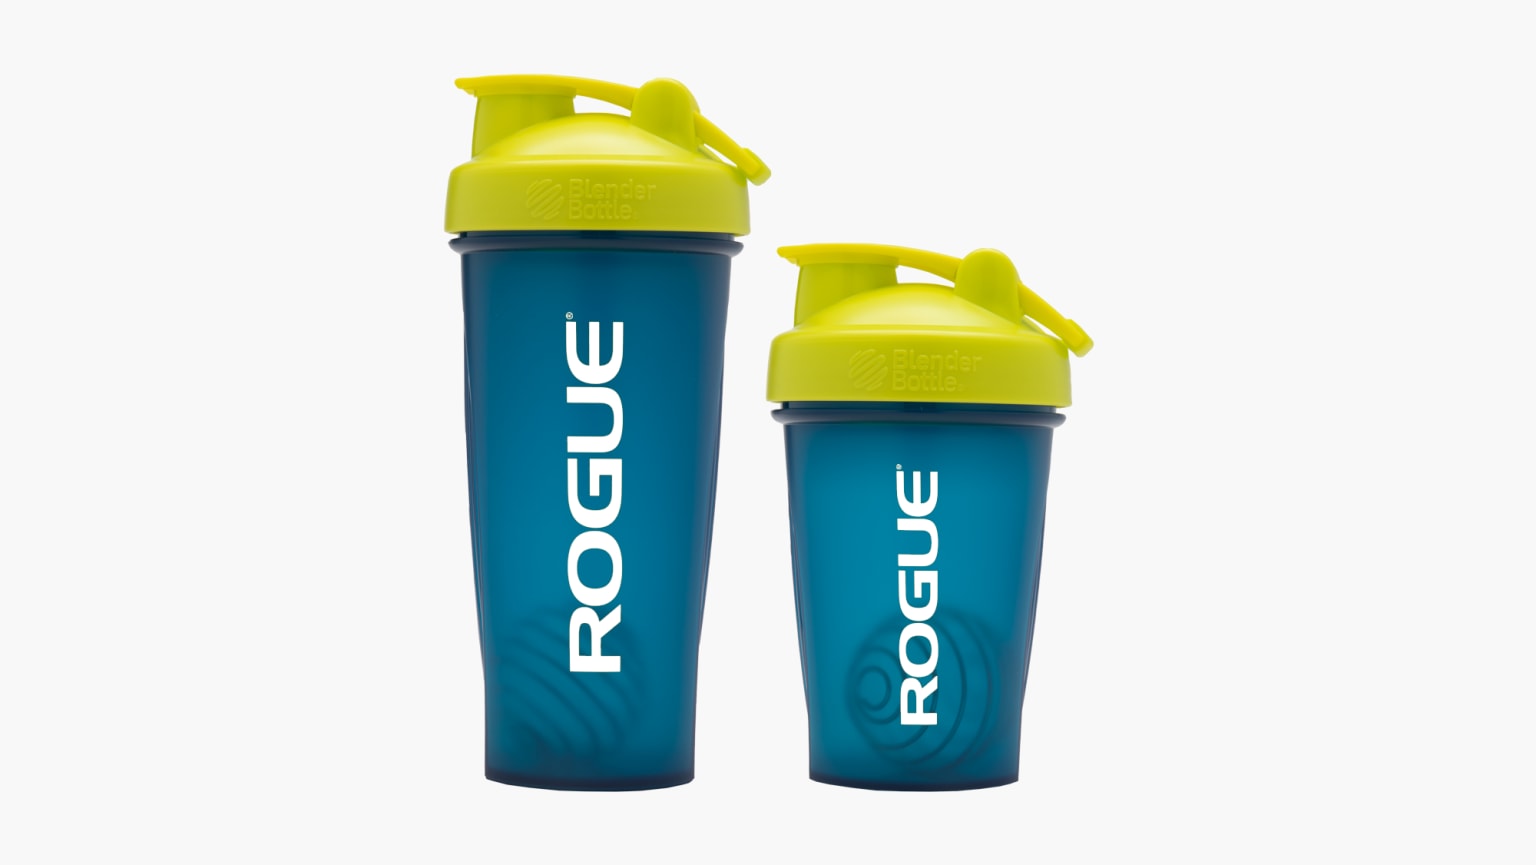 https://assets.roguefitness.com/f_auto,q_auto,c_limit,w_1536,b_rgb:f8f8f8/catalog/Gear%20and%20Accessories/Accessories/Shakers%20and%20Bottles/BB0039/BB0038-BB0039-H_y6nj02.png